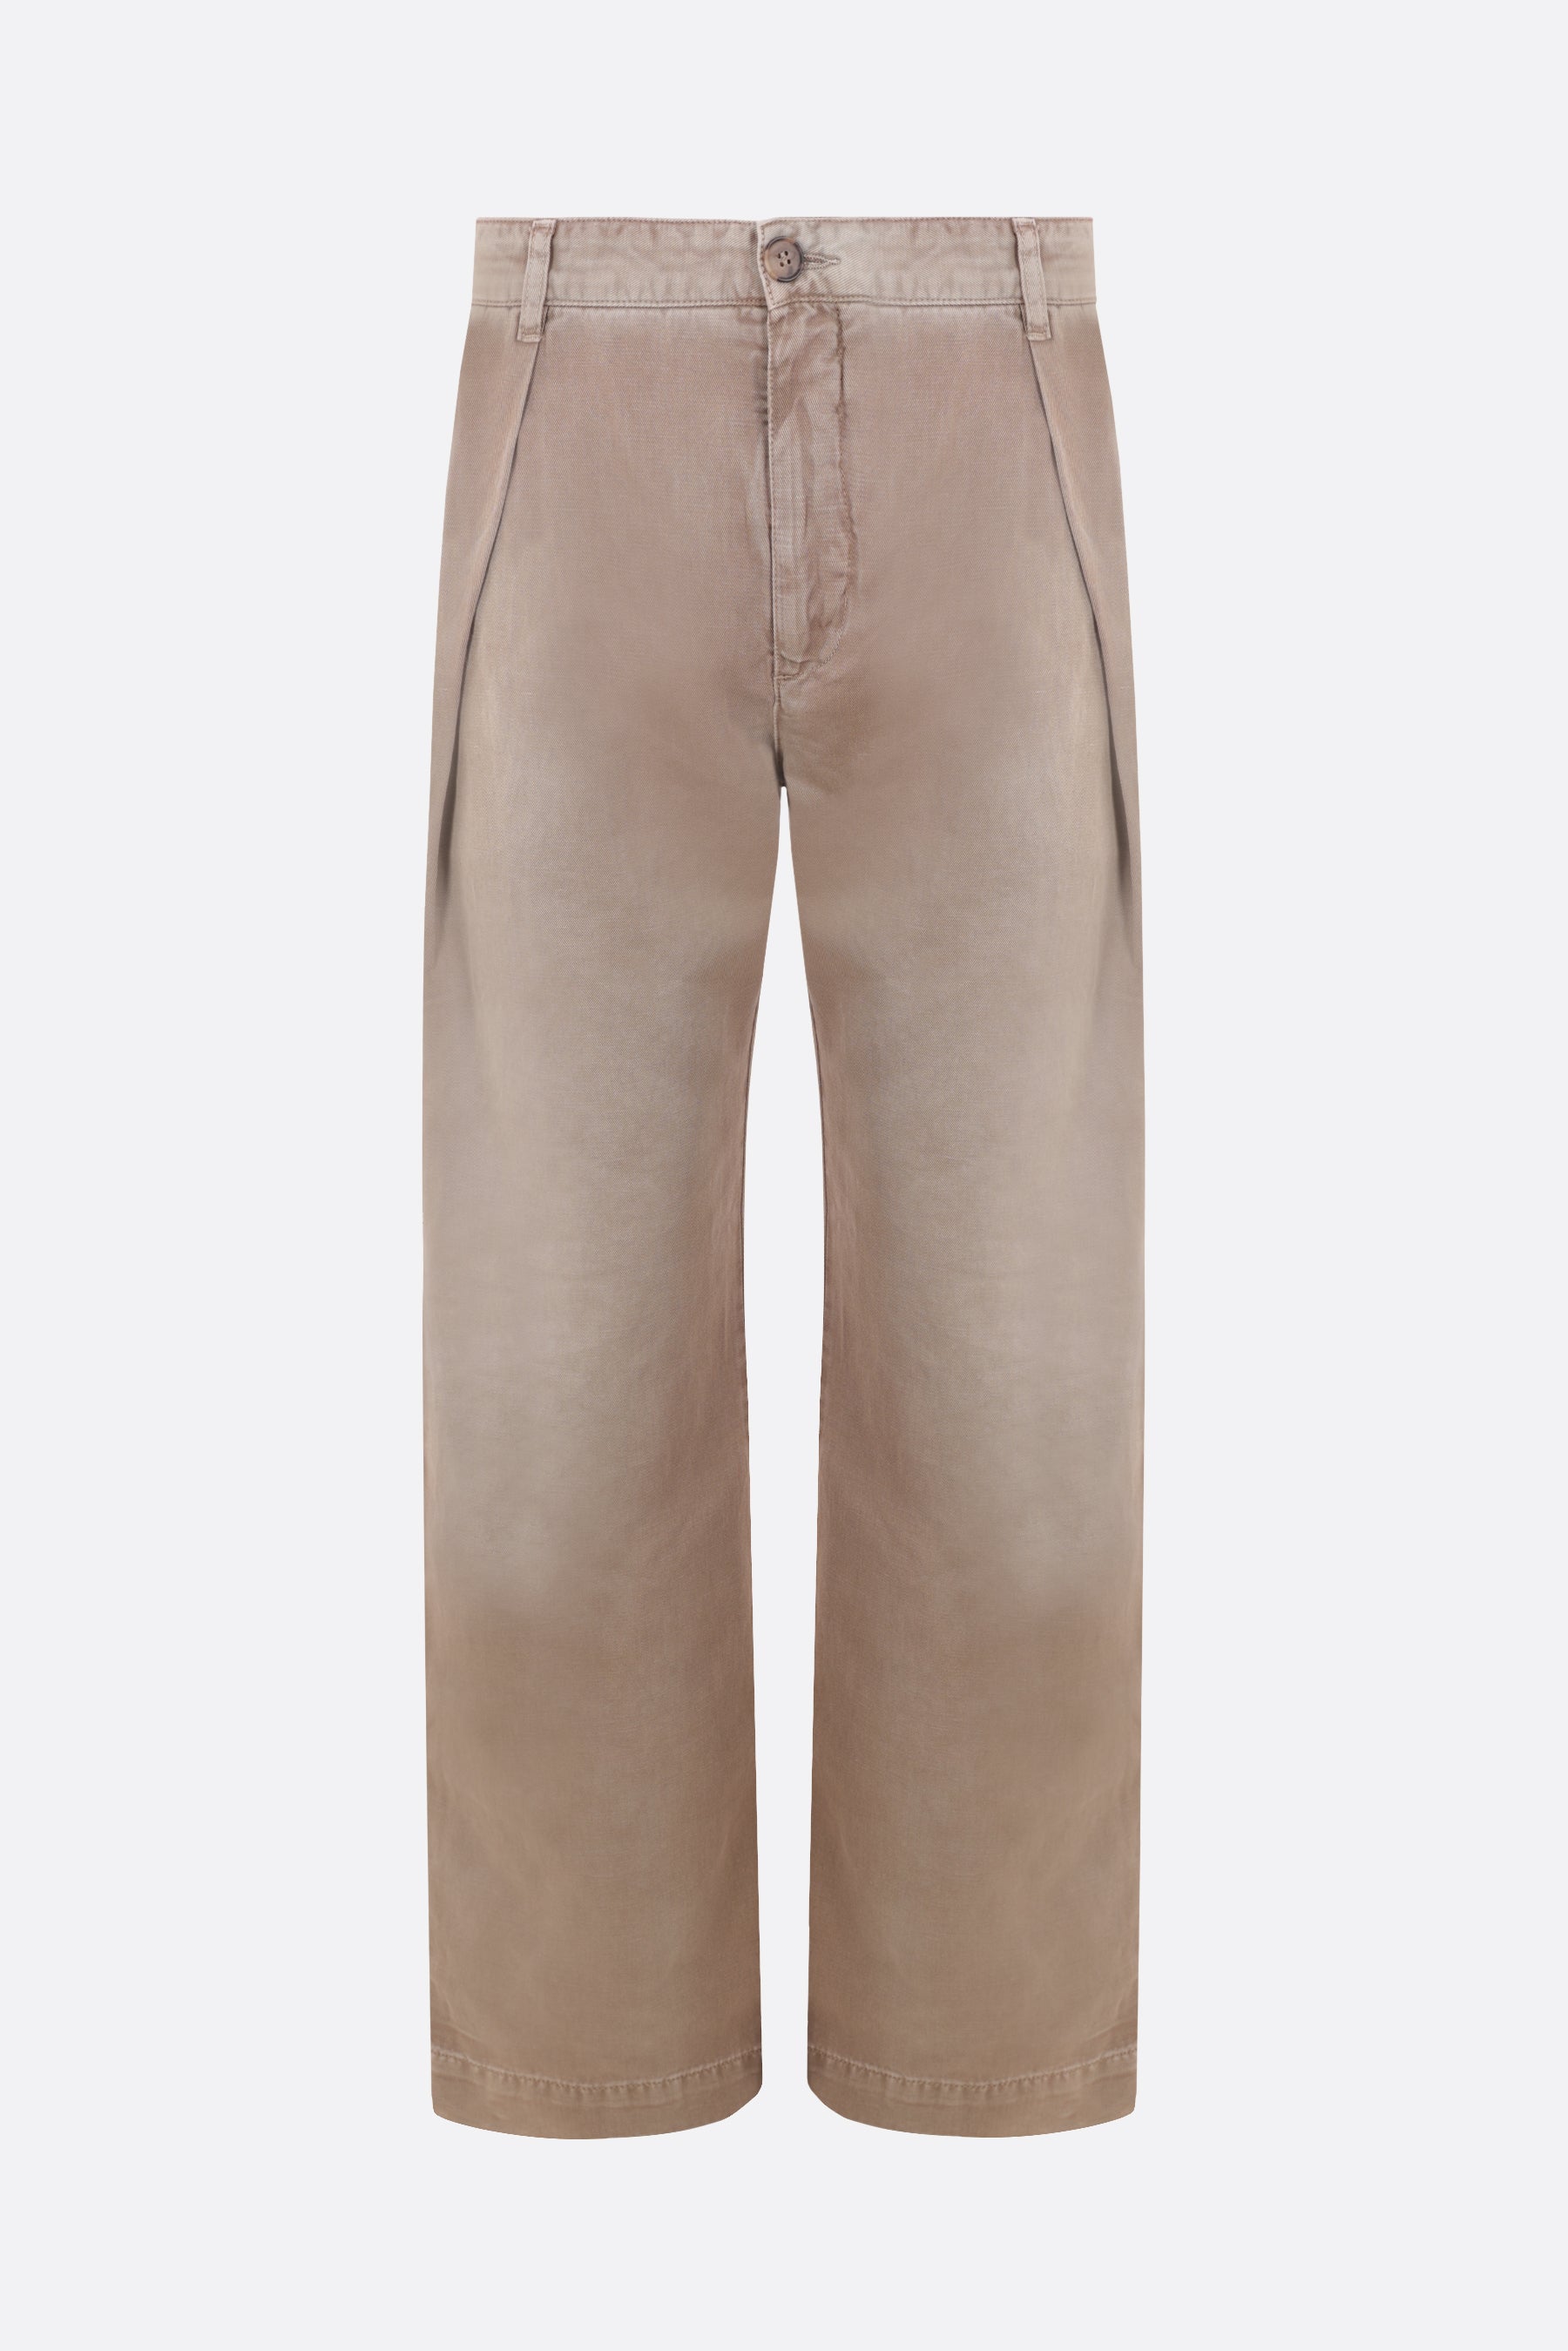 Fraser Pleated cotton and linen chino pants